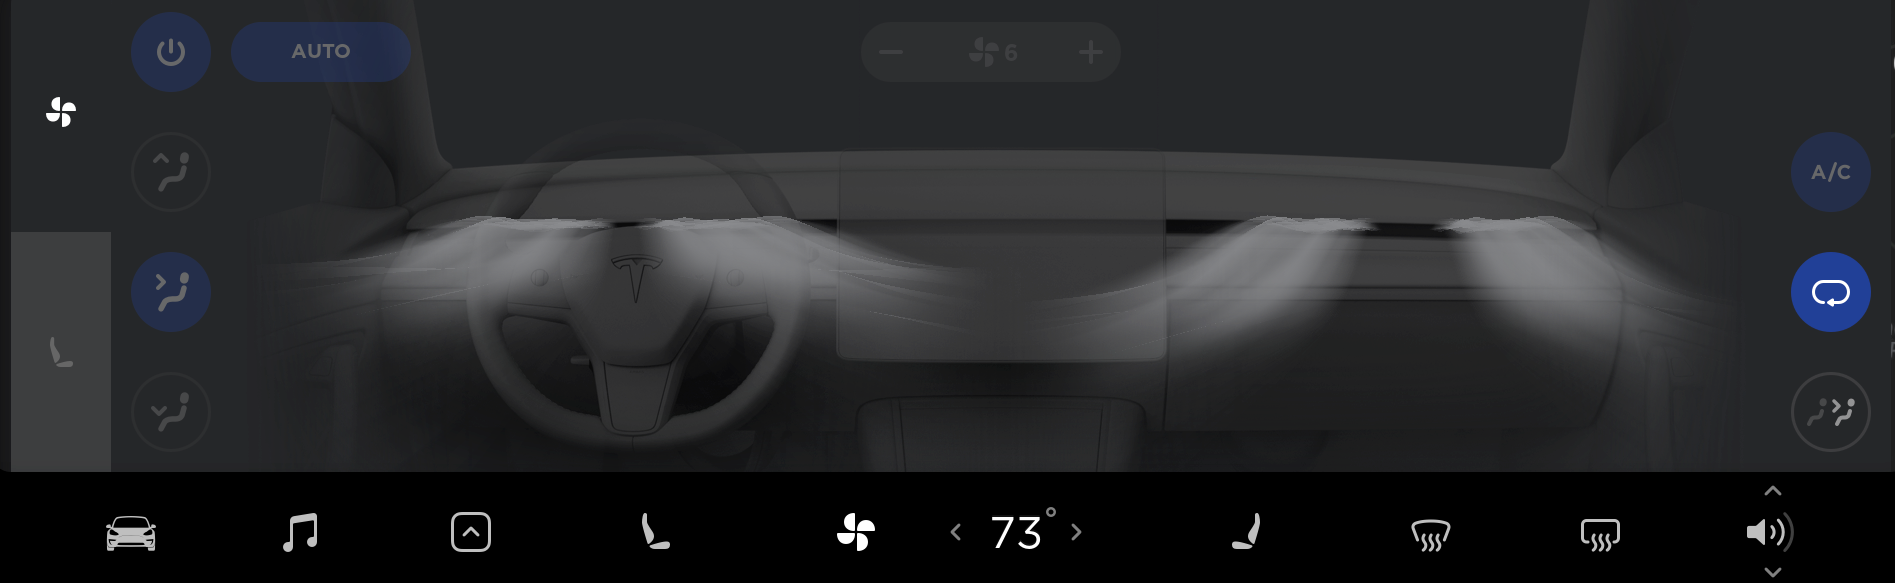 Tesla Climate Control feature in update 2018.40